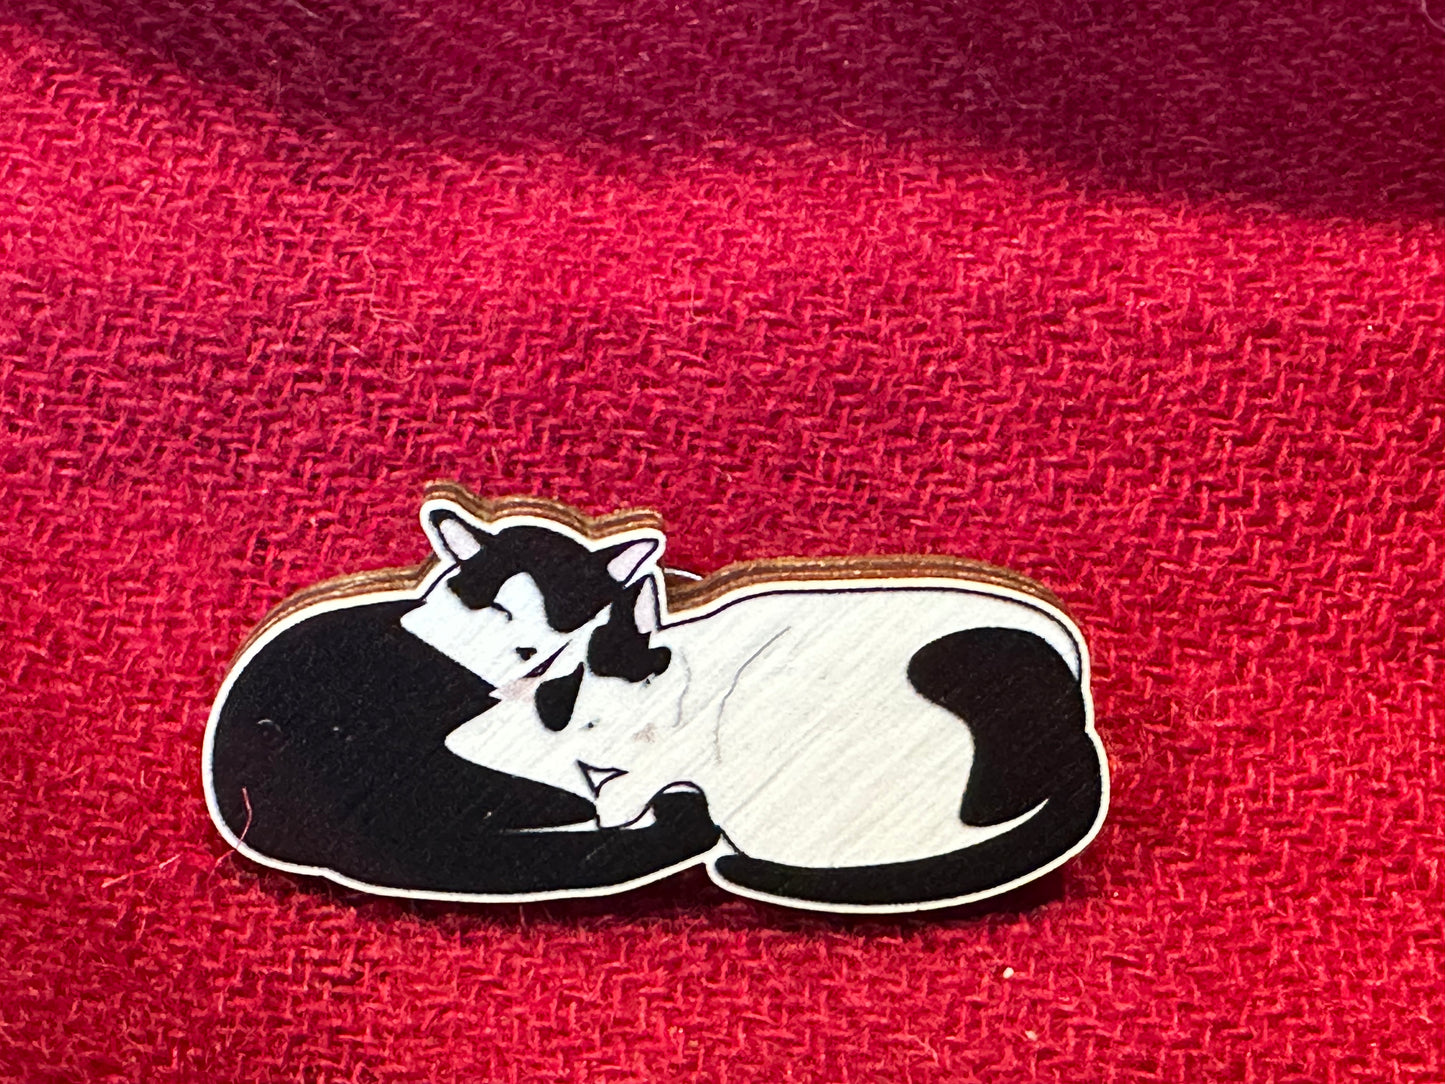 UmmPixies Curled Up Cats Wooden Pin Badge 